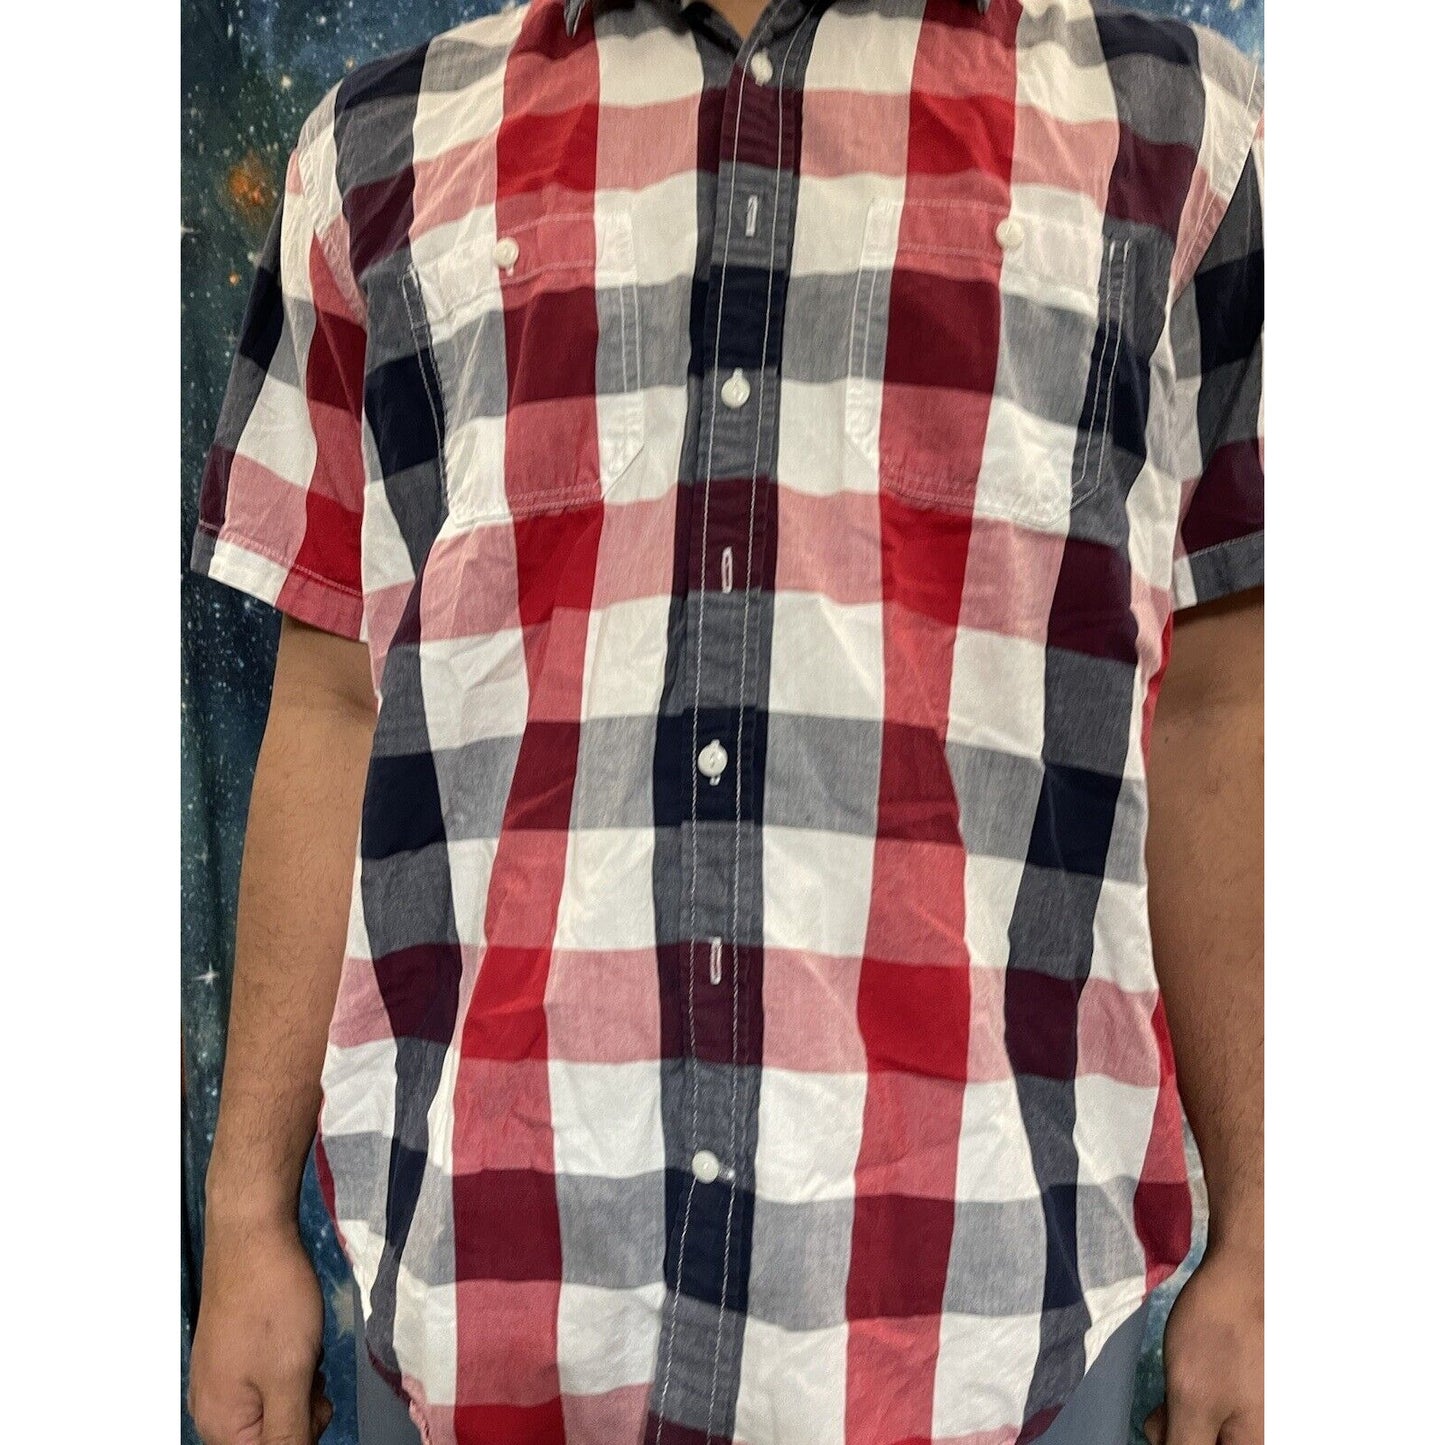 Old Navy XL Regular Fit Coupe Standard plaid red white blue button up shirt